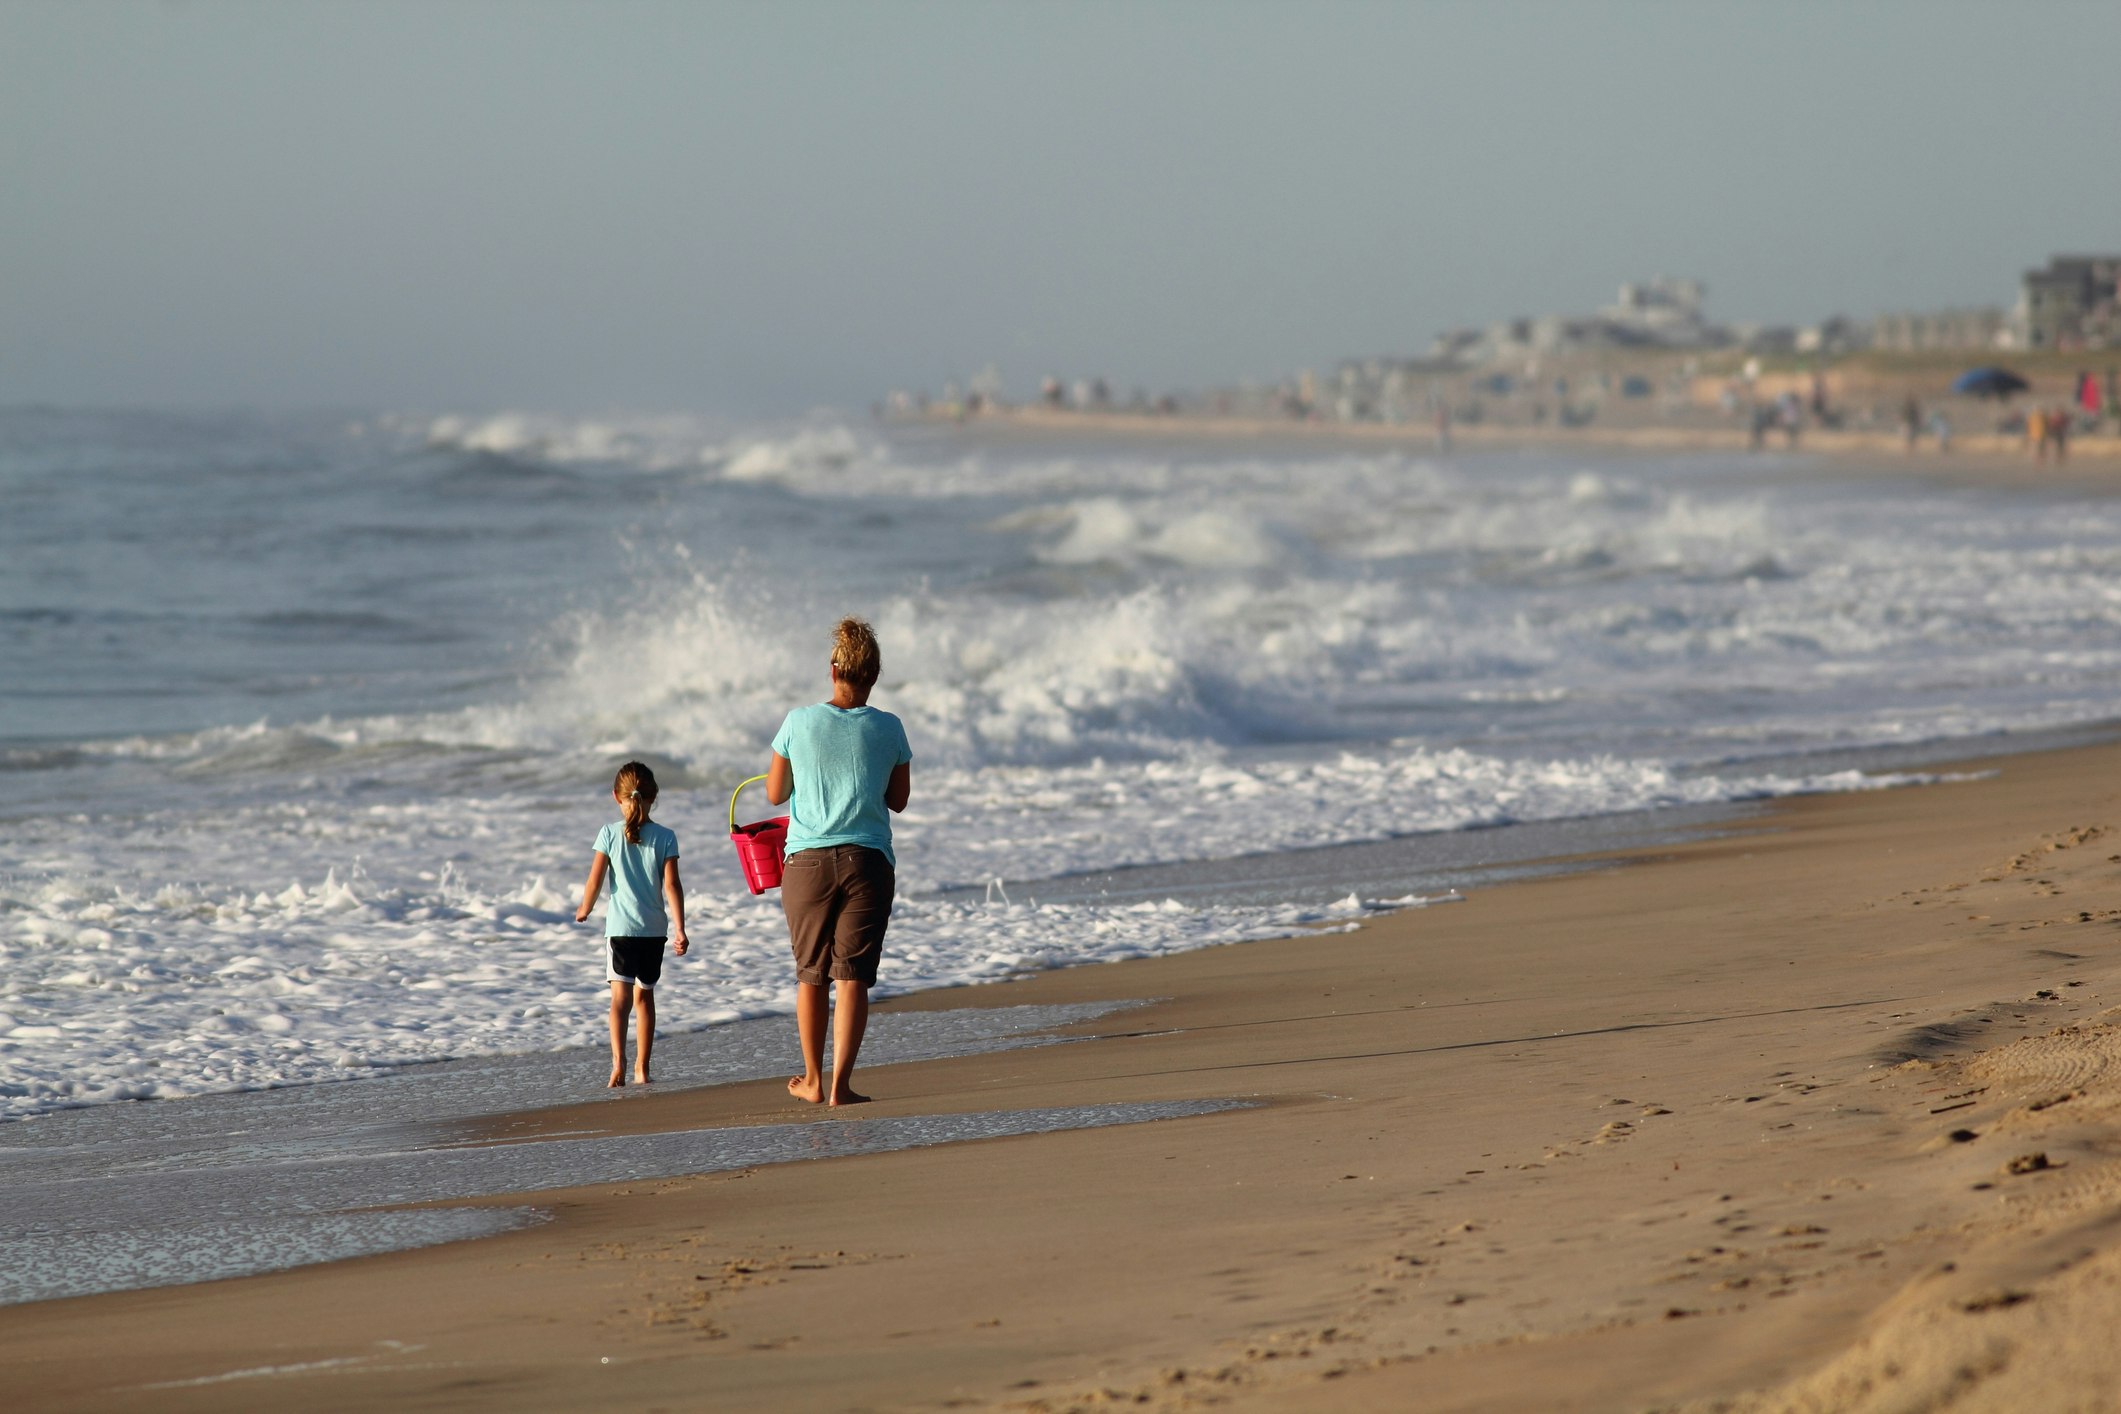 A mother and her young daughter walk along a beach in the morning. The waves are high and the mother is carrying a red bucket